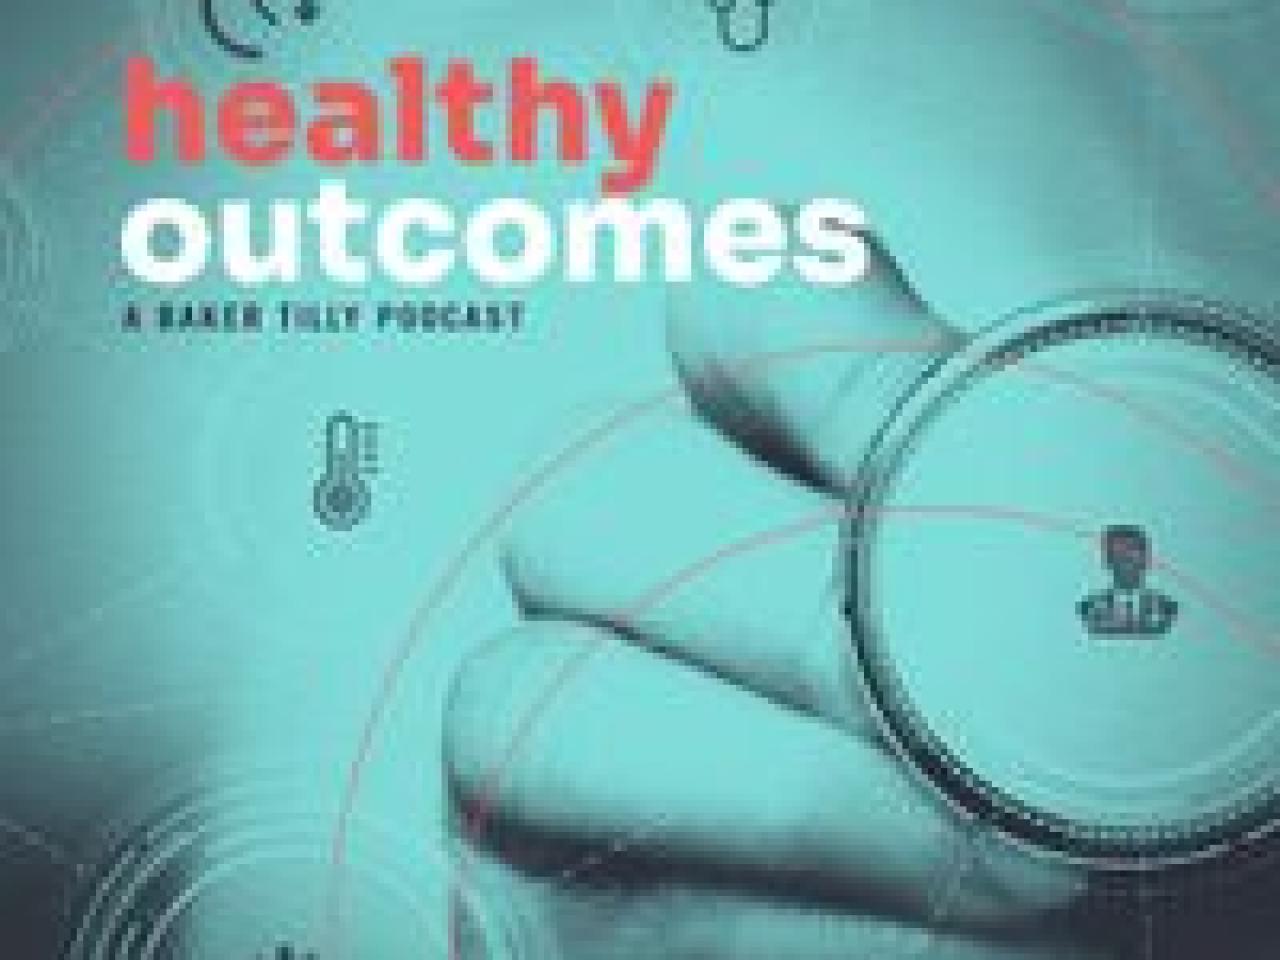 "healthy outcomes"